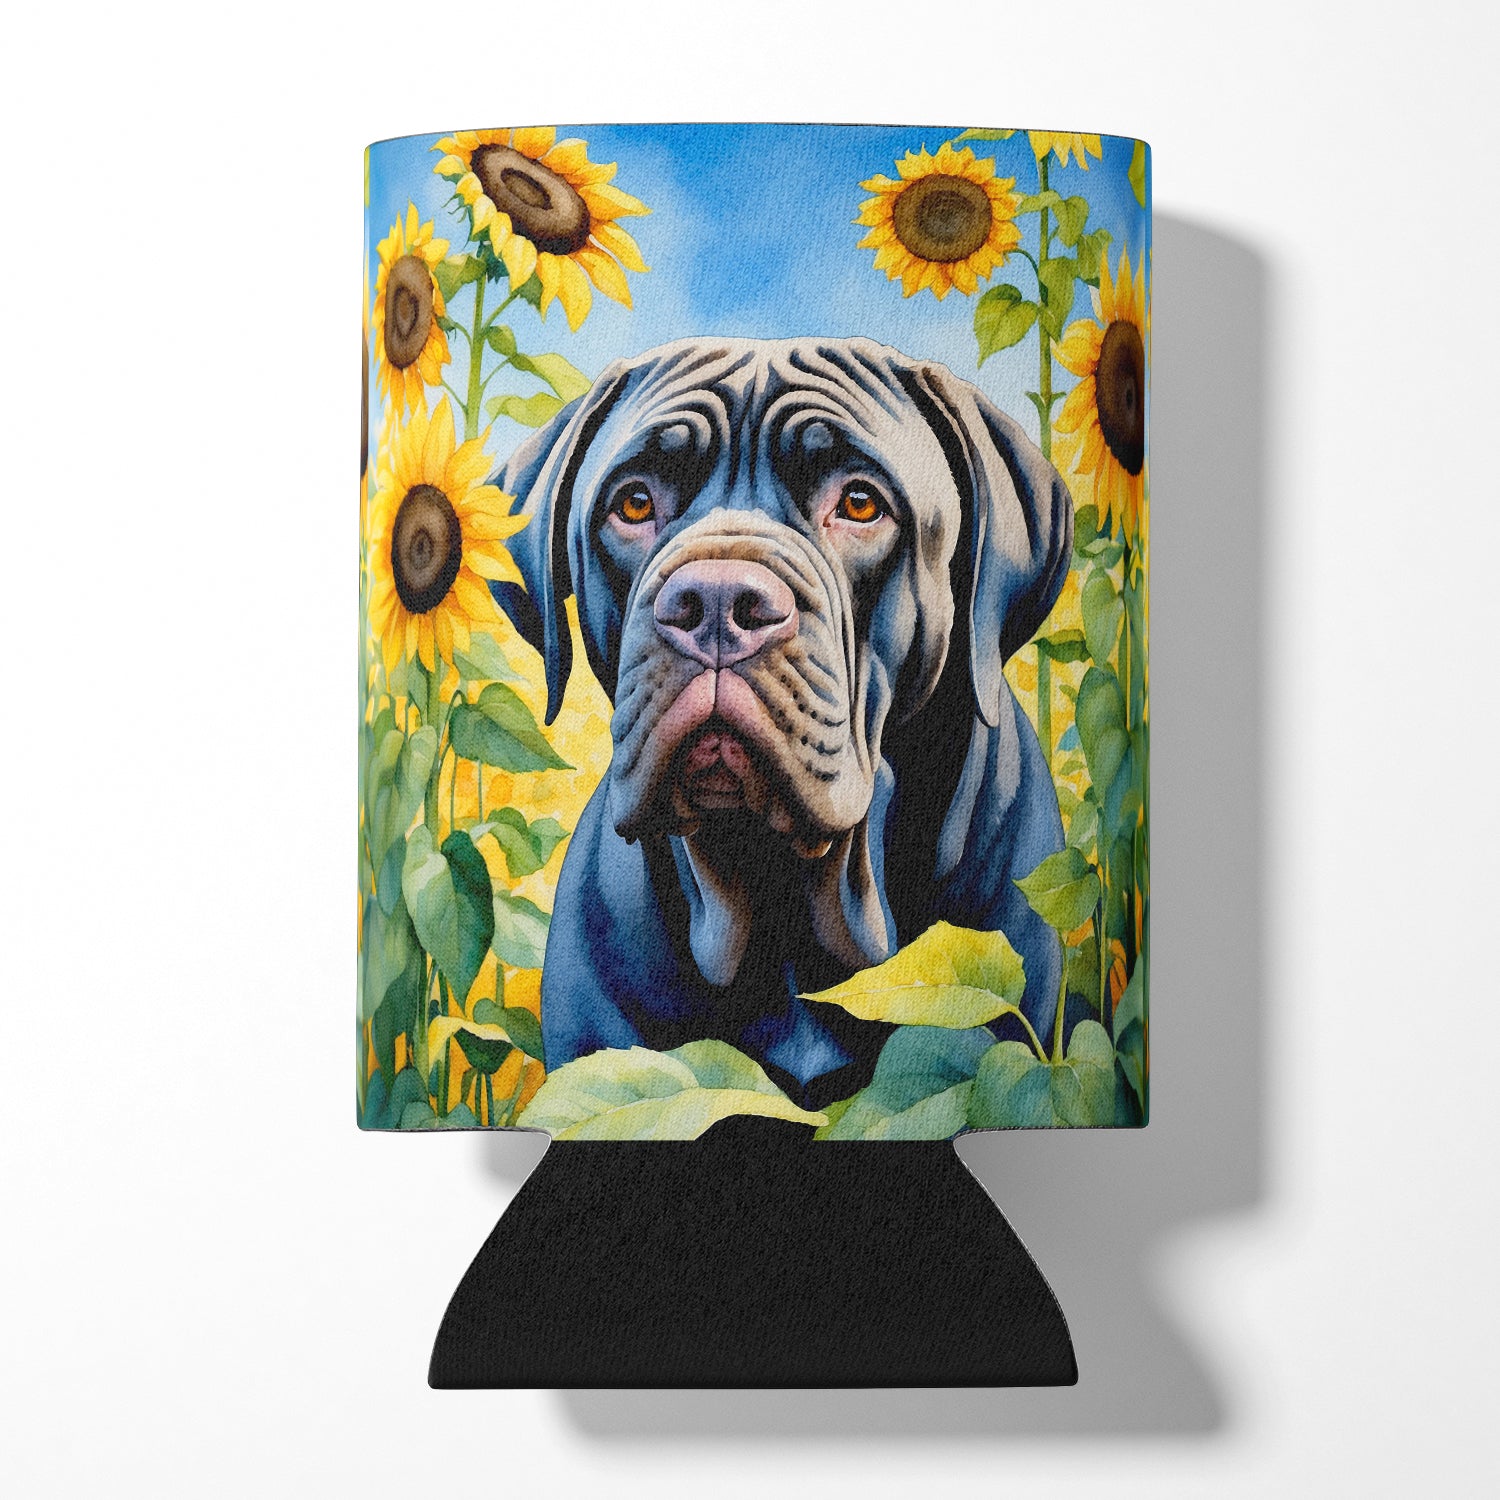 Buy this Neapolitan Mastiff in Sunflowers Can or Bottle Hugger